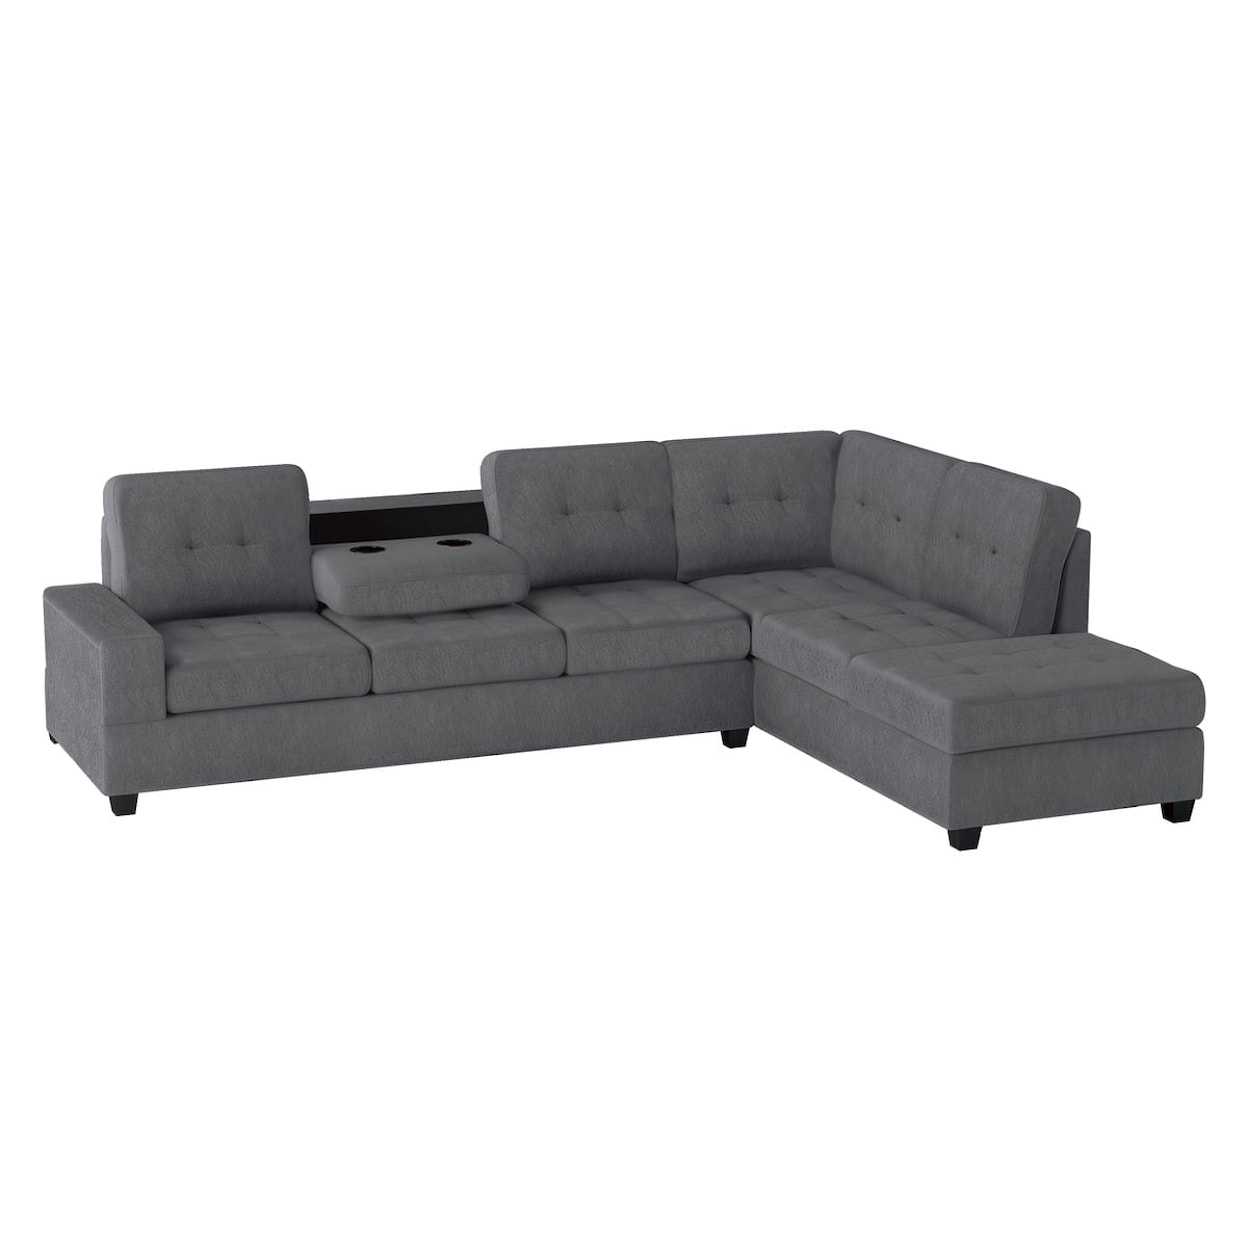 Homelegance Furniture Homelegance 2-Piece Sectional Sofa with Ottoman